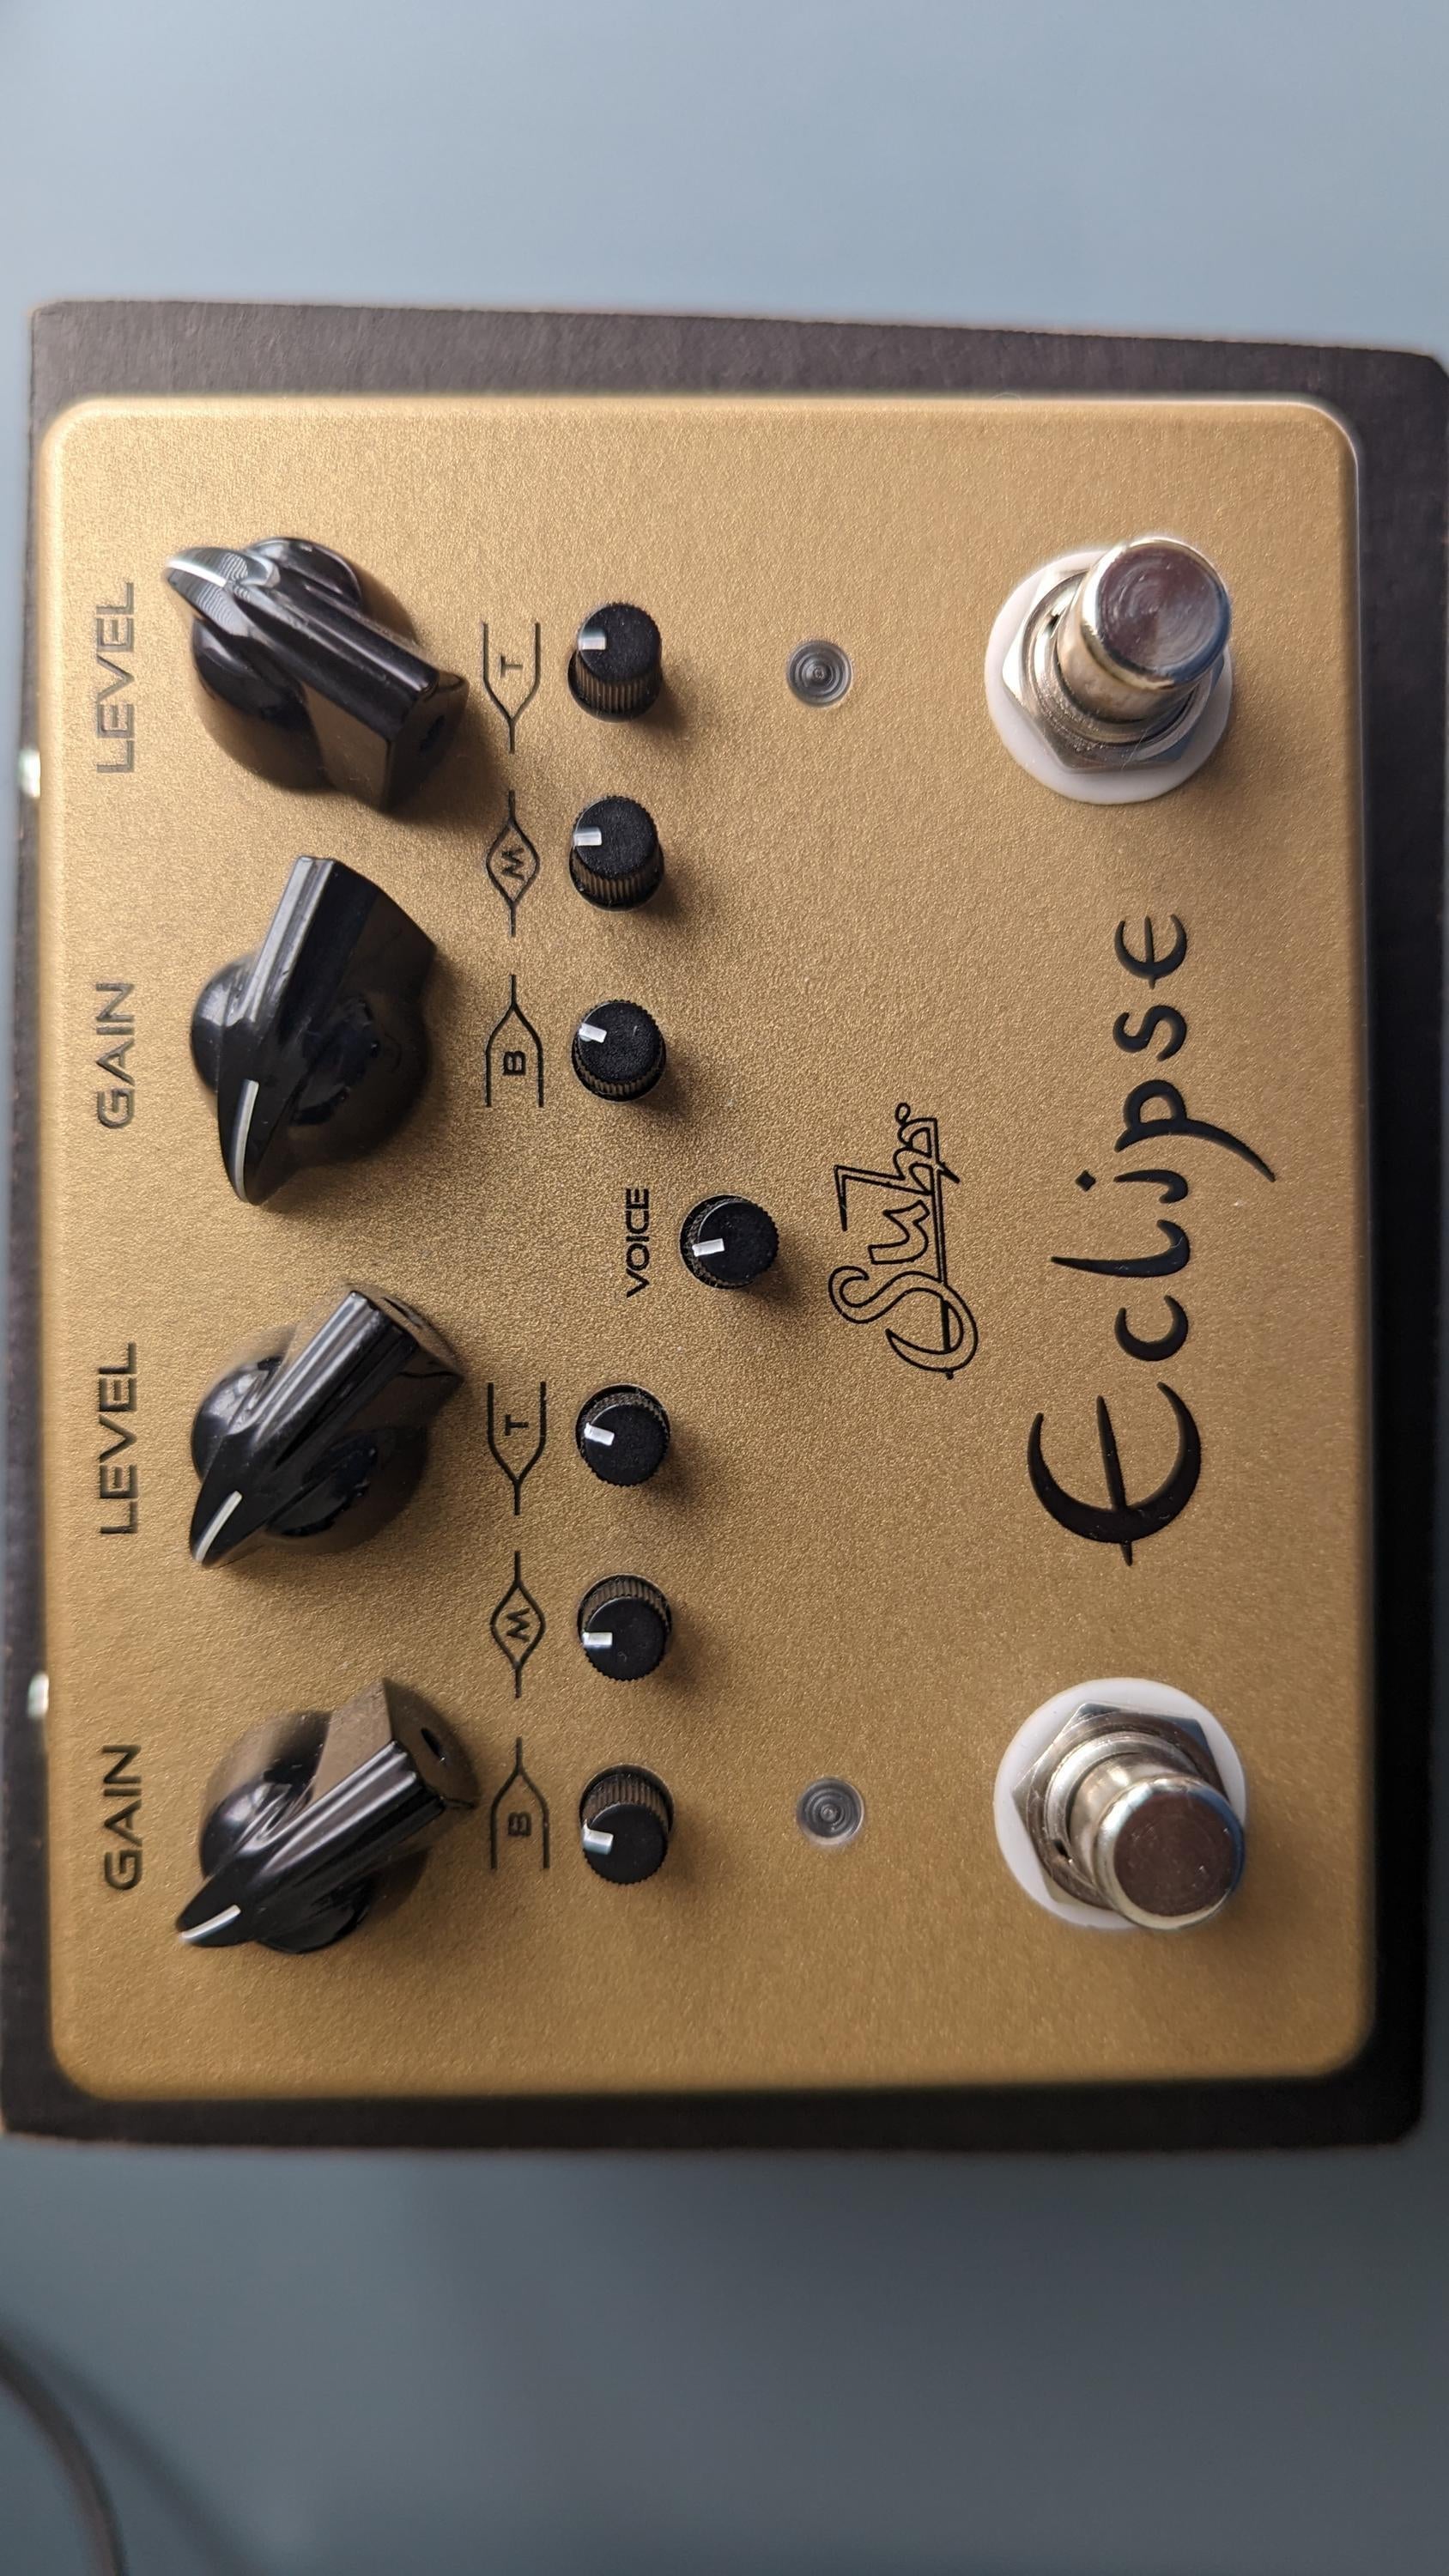 Used Suhr Eclipse Overdrive/Distortion   Sweetwater's Gear Exchange